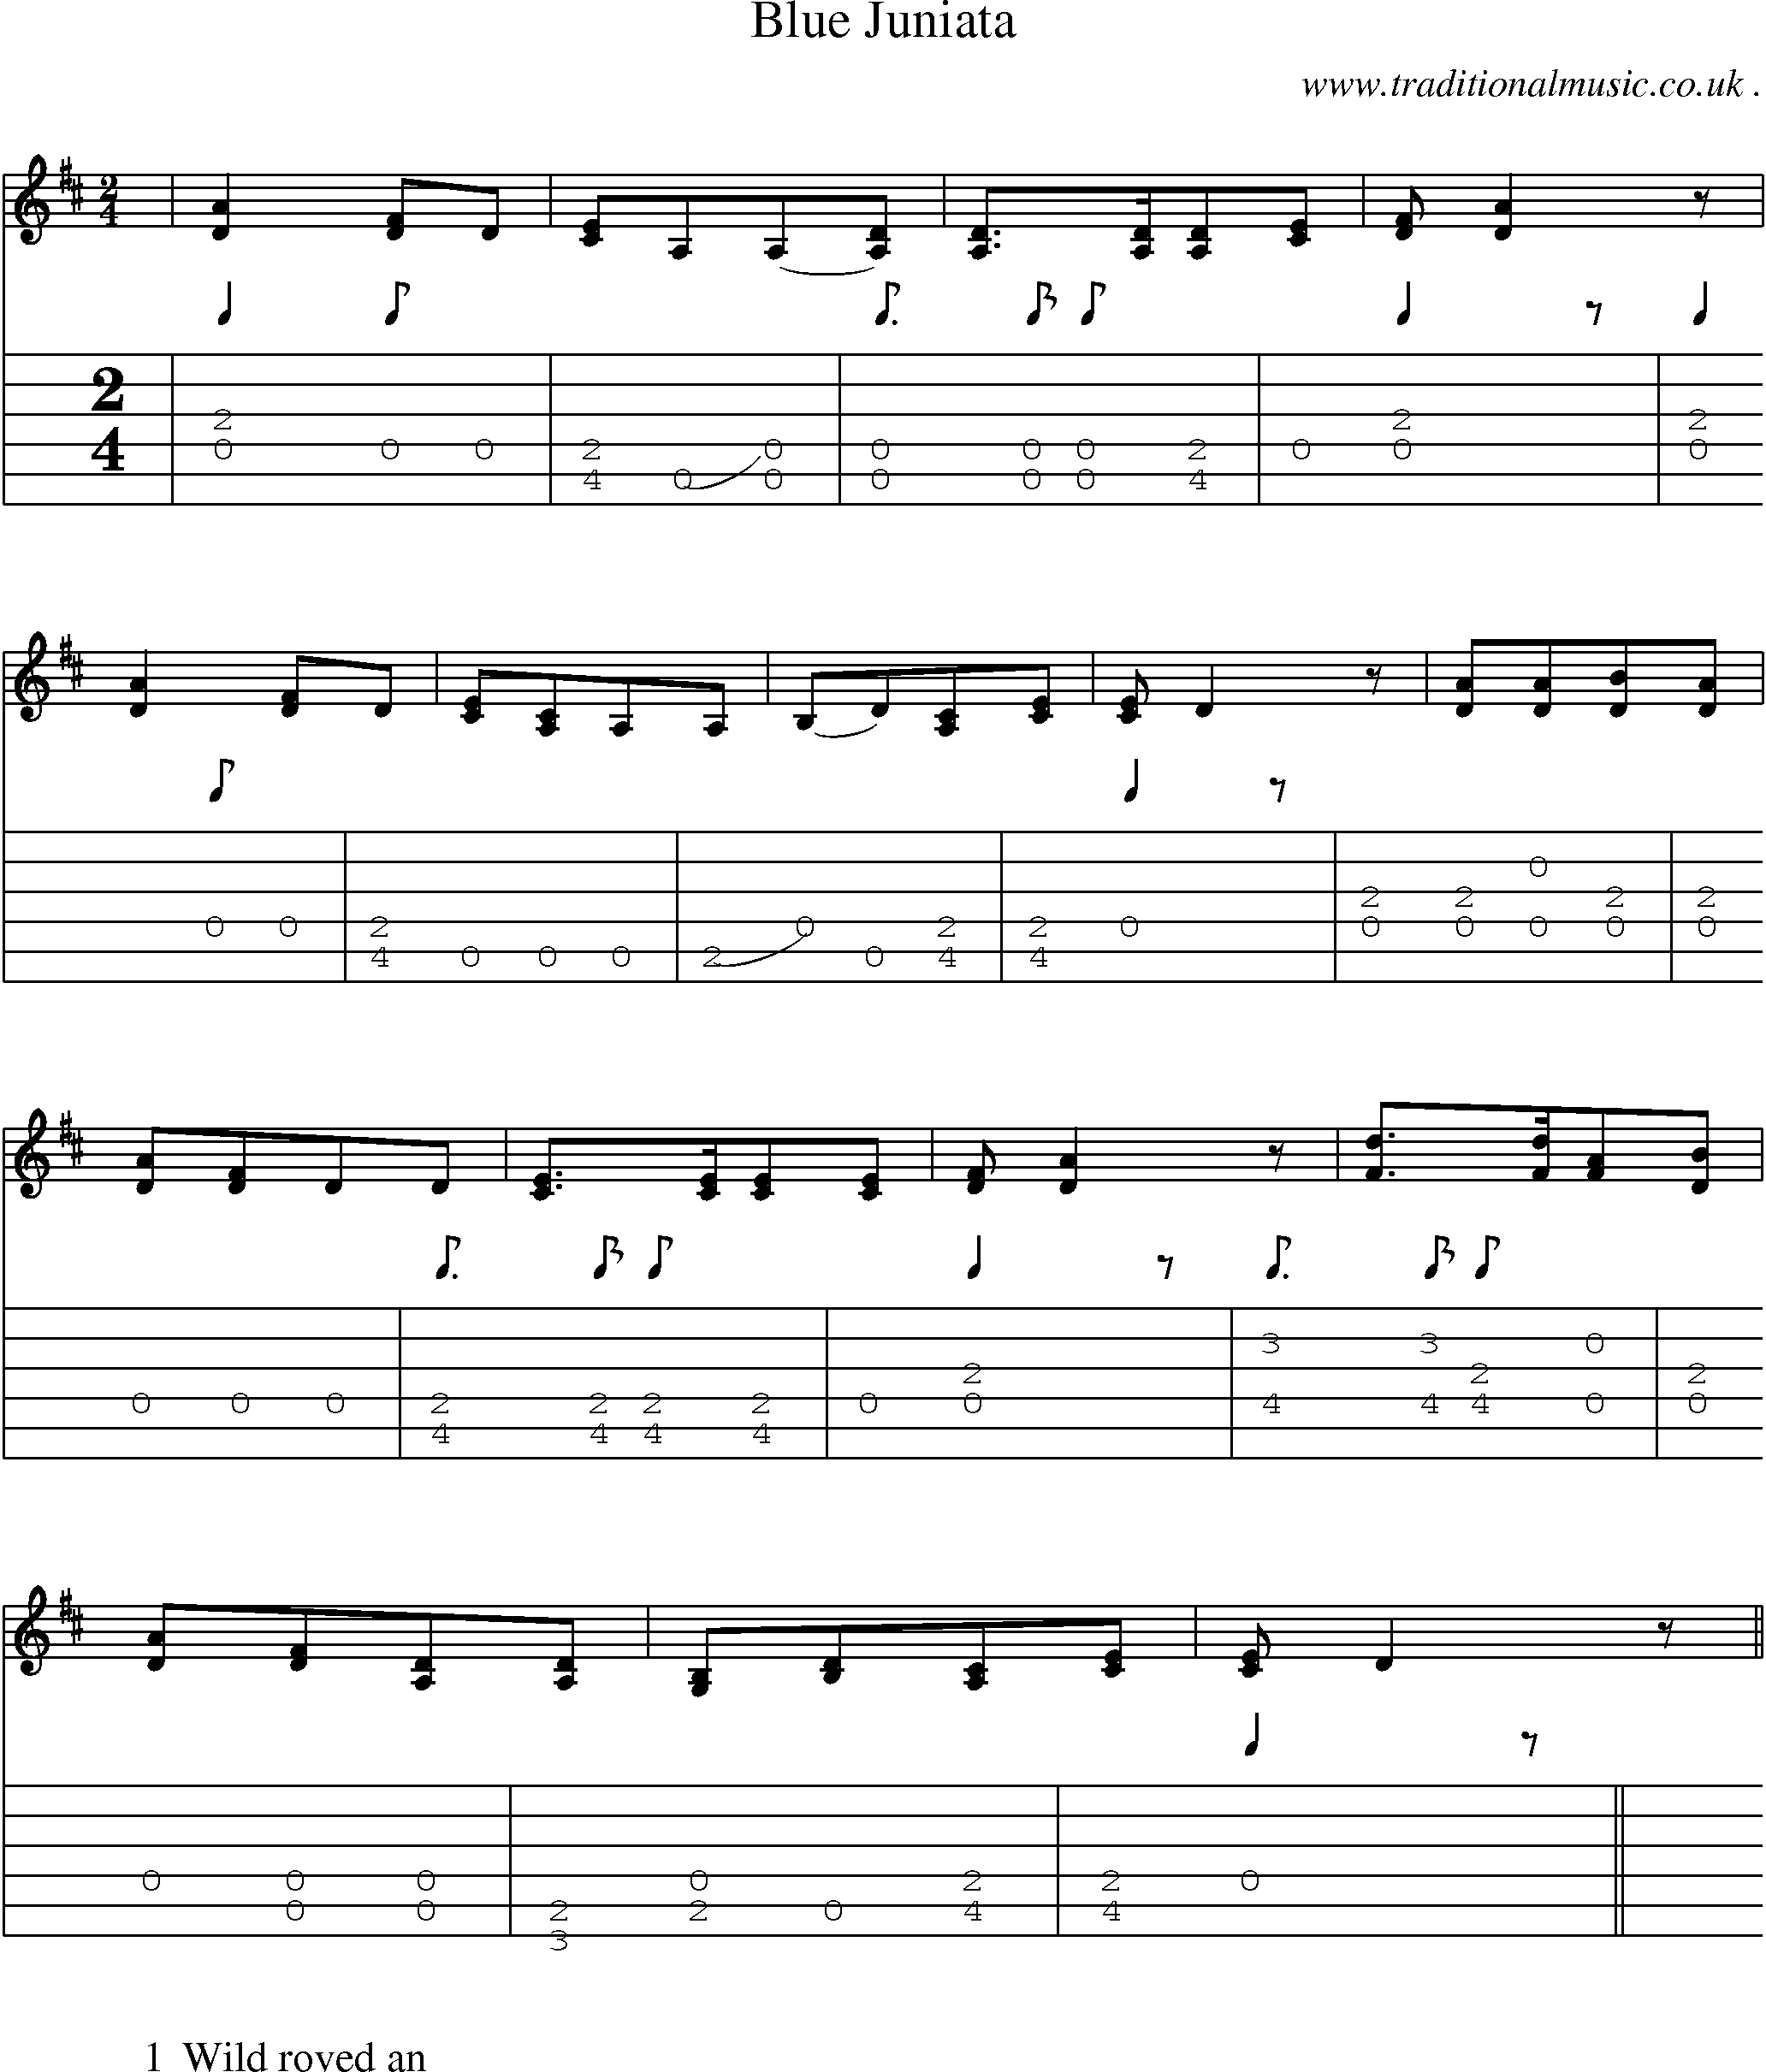 Music Score and Guitar Tabs for Blue Juniata